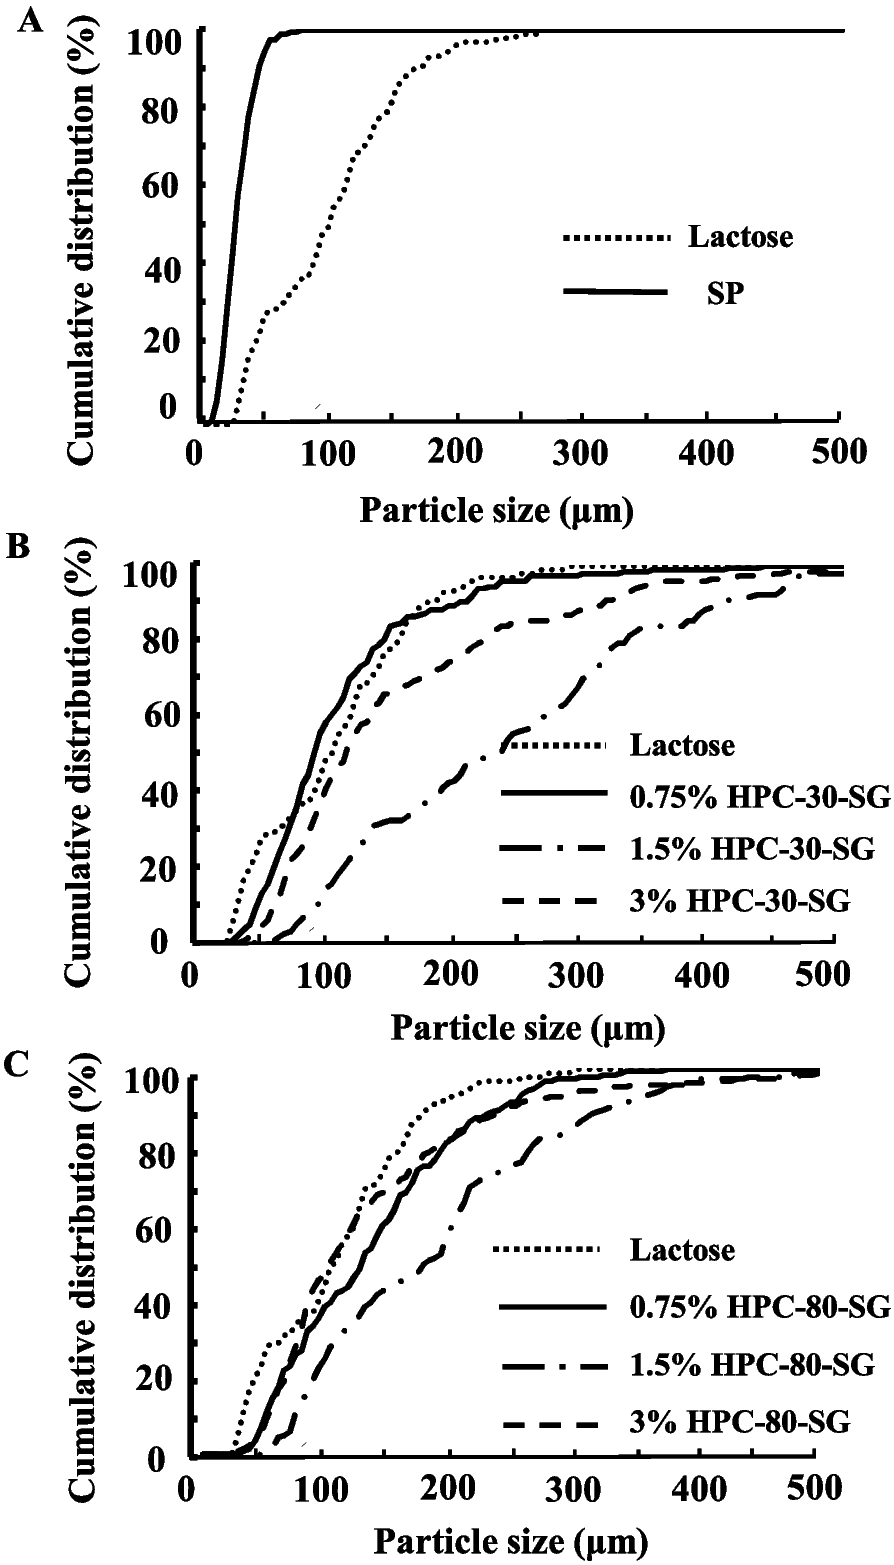 Evaluation of starch granules based on hydroxypropylcellulose as a substitute for excipient lactose